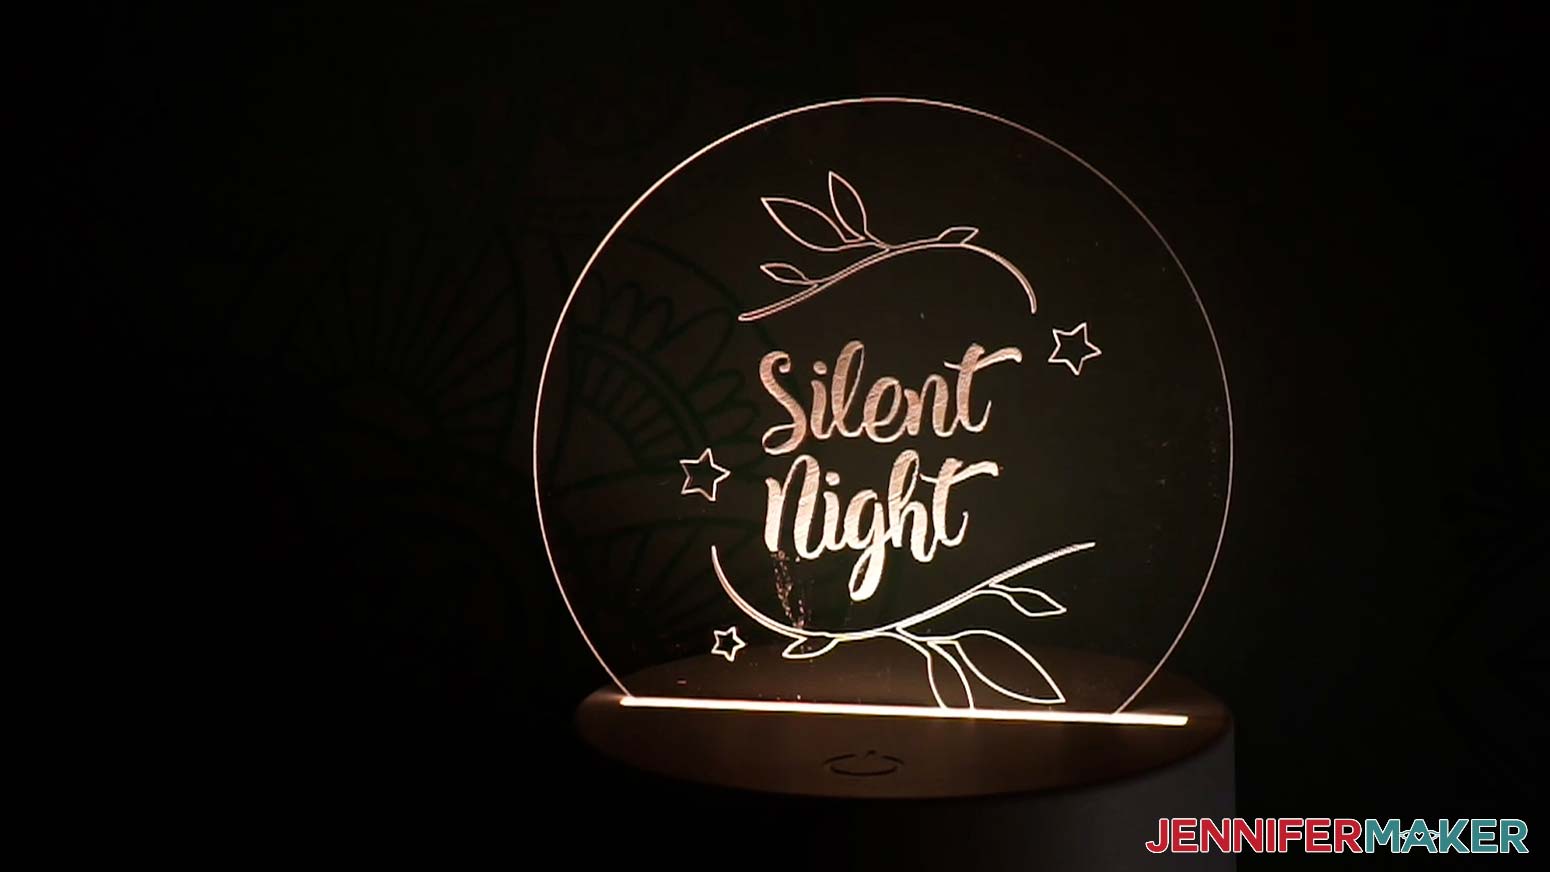 fill designs jennifermaker engraved nightlight for the holidays silent night in kite script font with graphic design elements